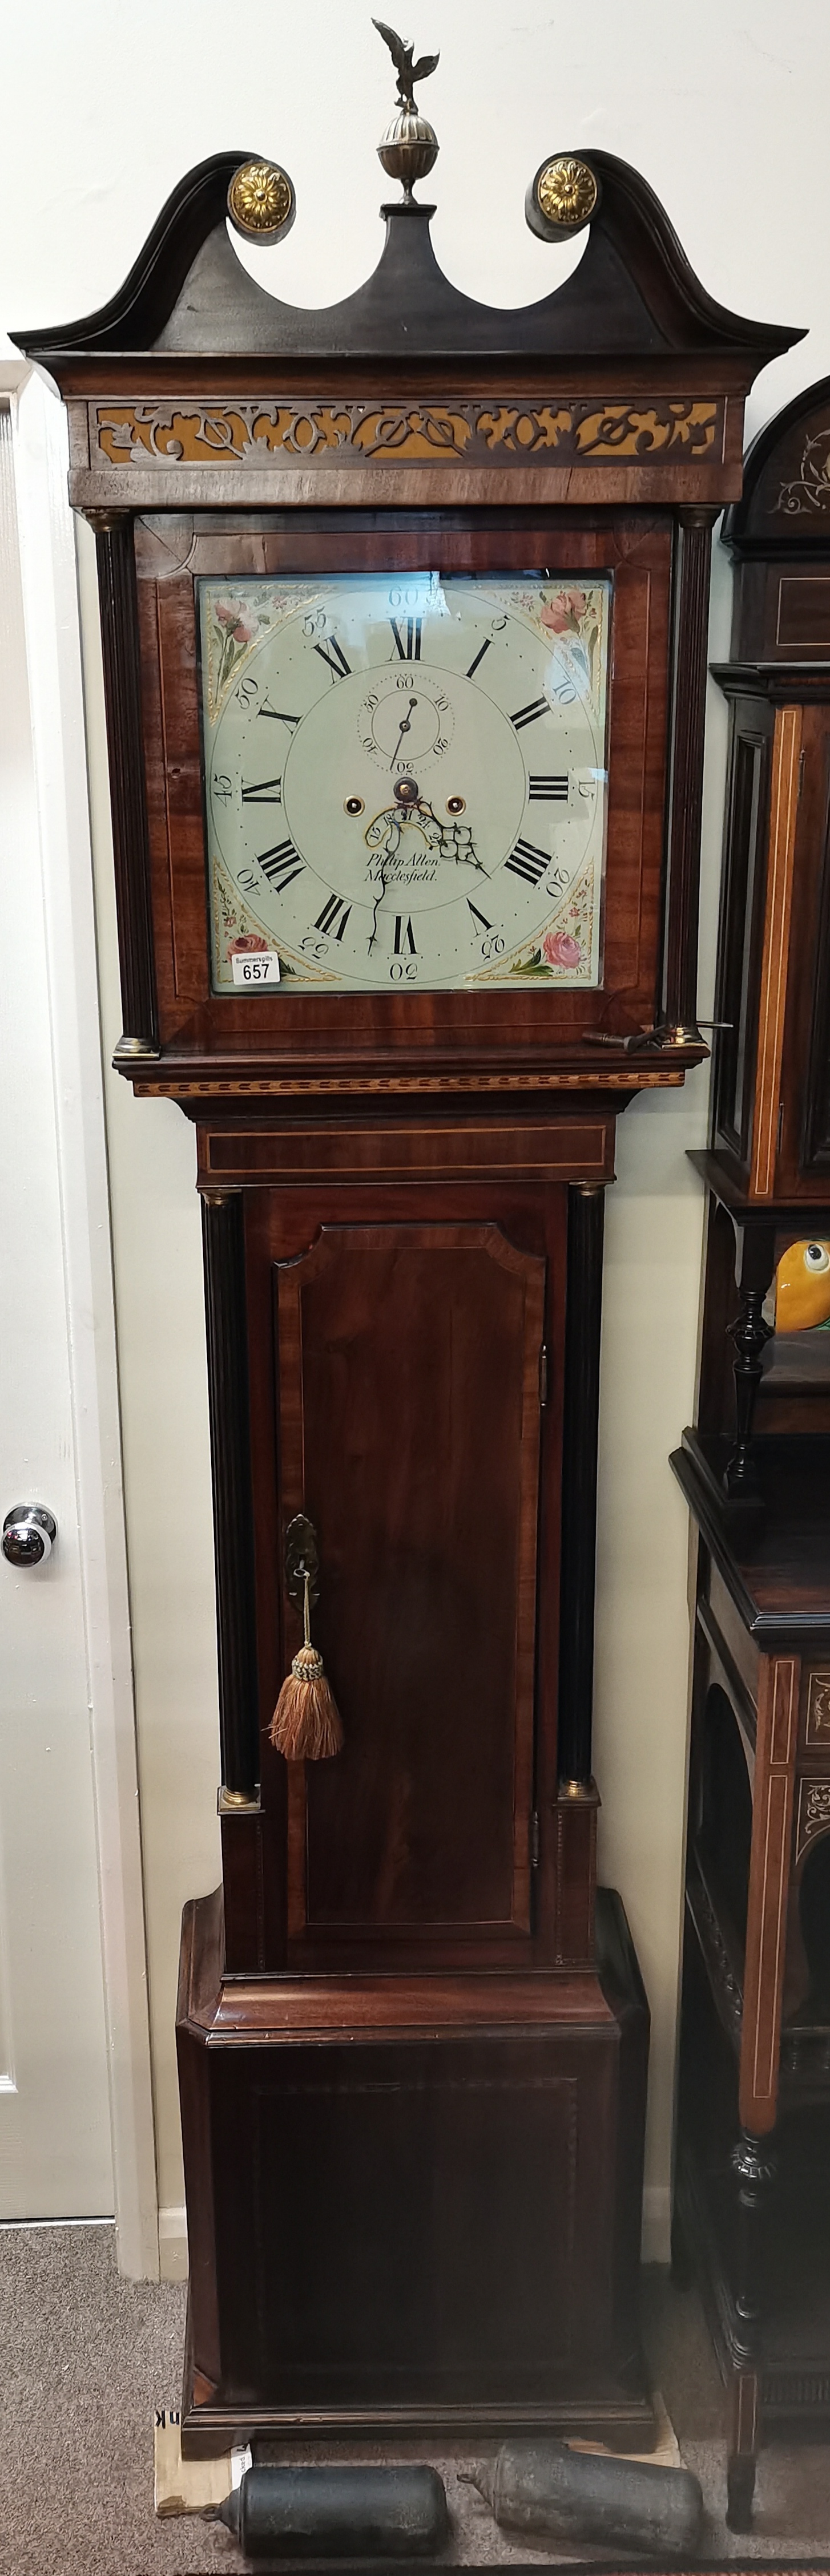 8 day Mahogany and inlaid grandfather clock maker Philip Allen Macklesfield